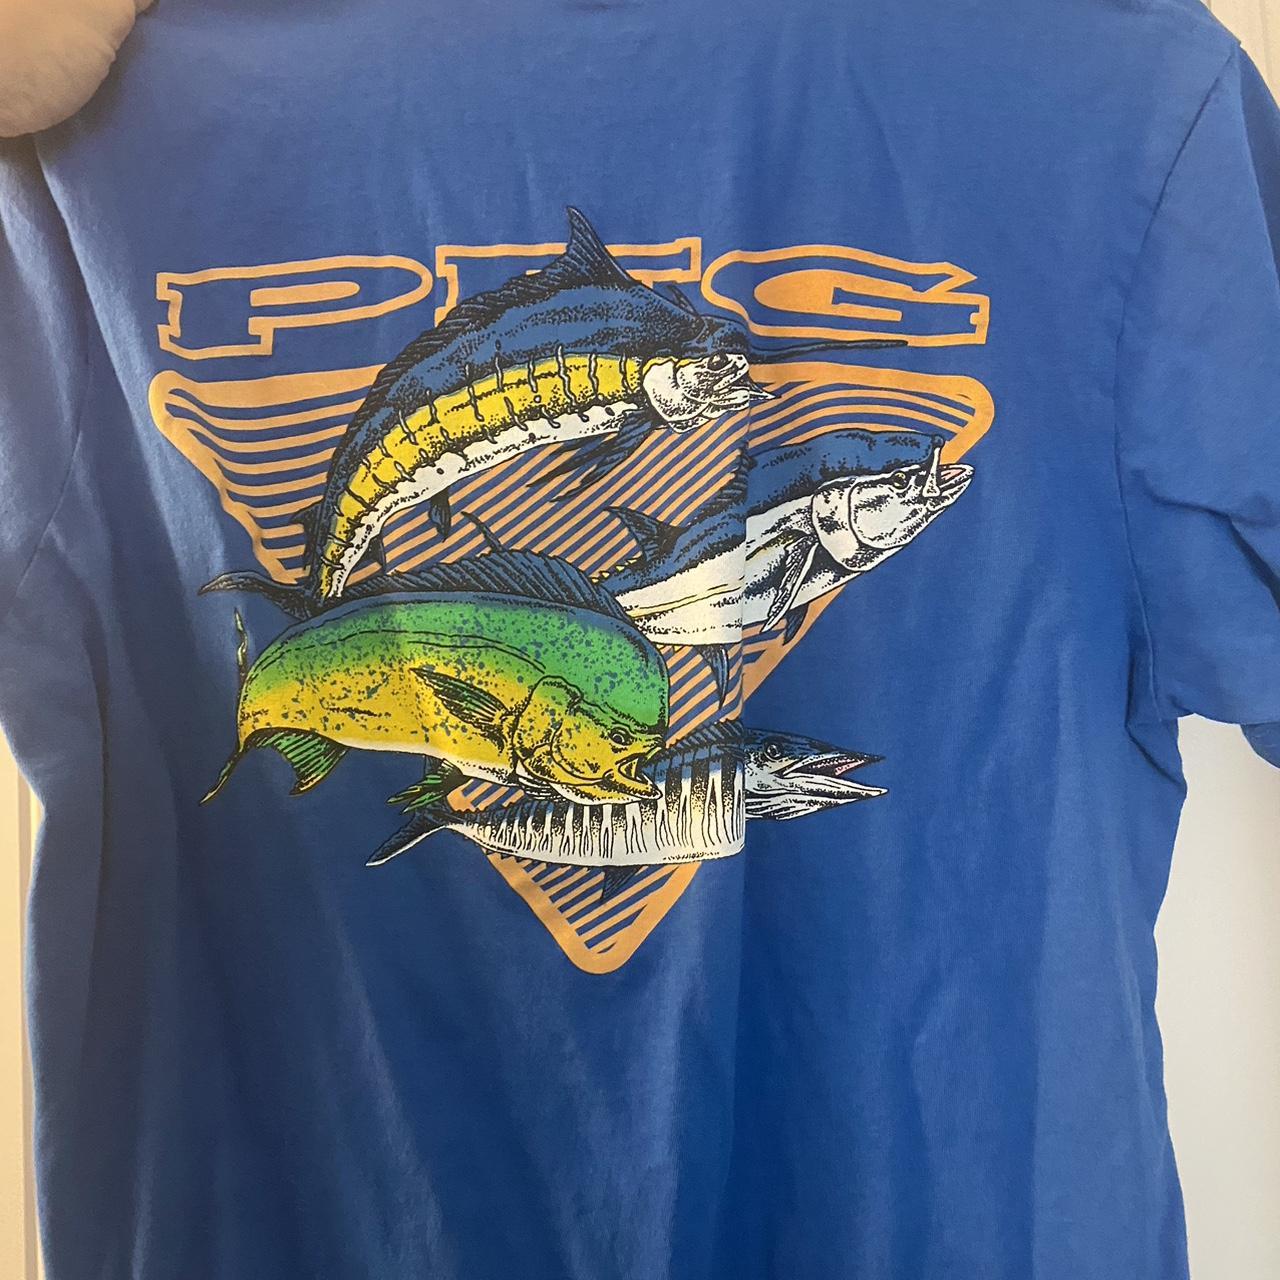 Columbia PFG Graphic Tee, Great condition worn only